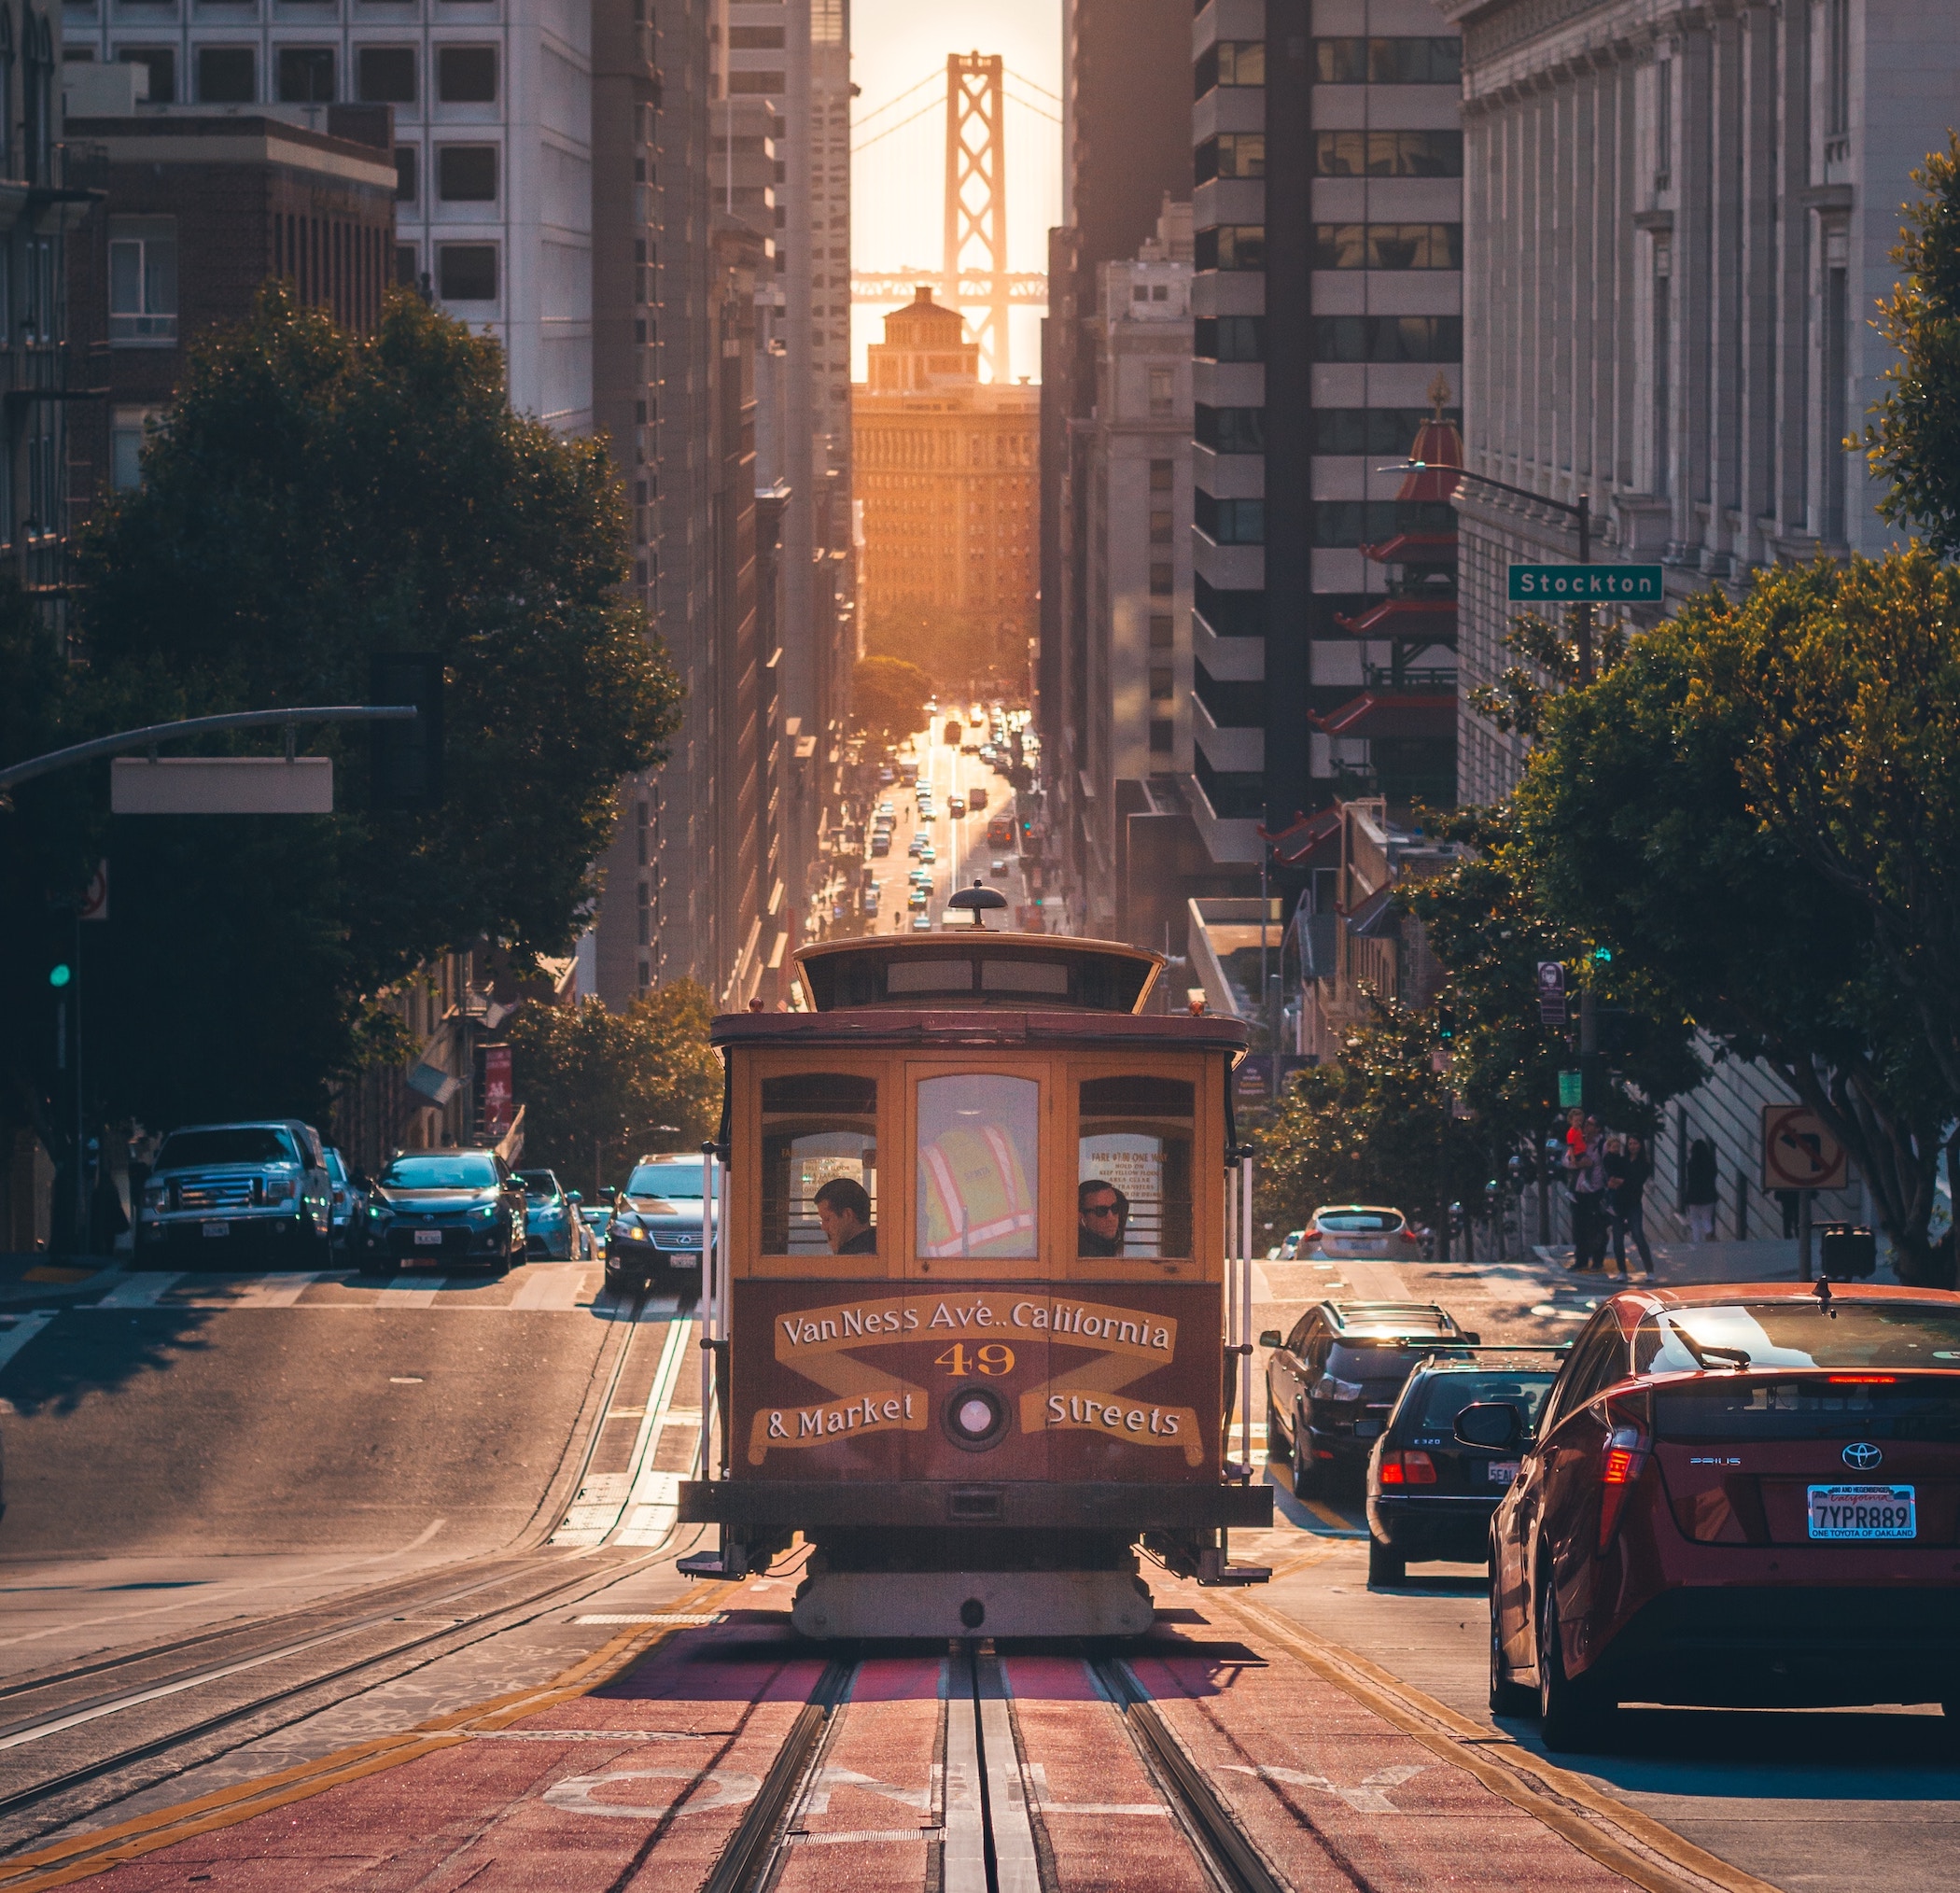 Housing affordability in San Francisco is about to get even tighter, as several tech companies intend to launch their initial public offering (IPO) this year, and their newly enriched employees look to the Bay for new homes.